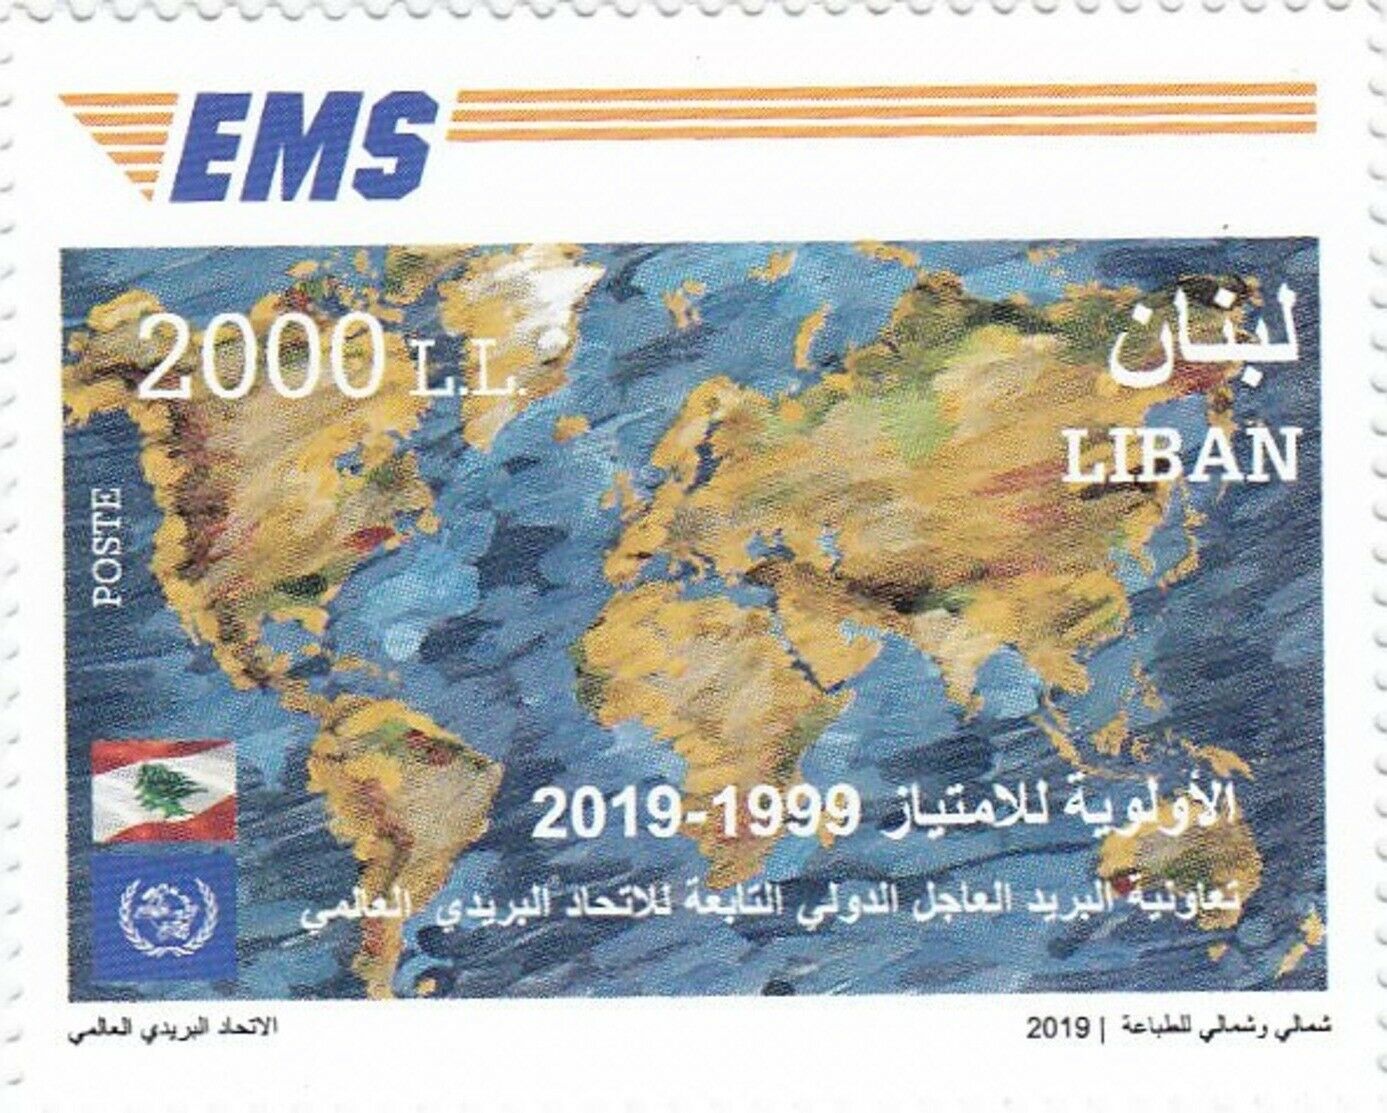 Lebanon 2019 New Mnh - Joint Issue Stamp, Ems (express Mail Service)